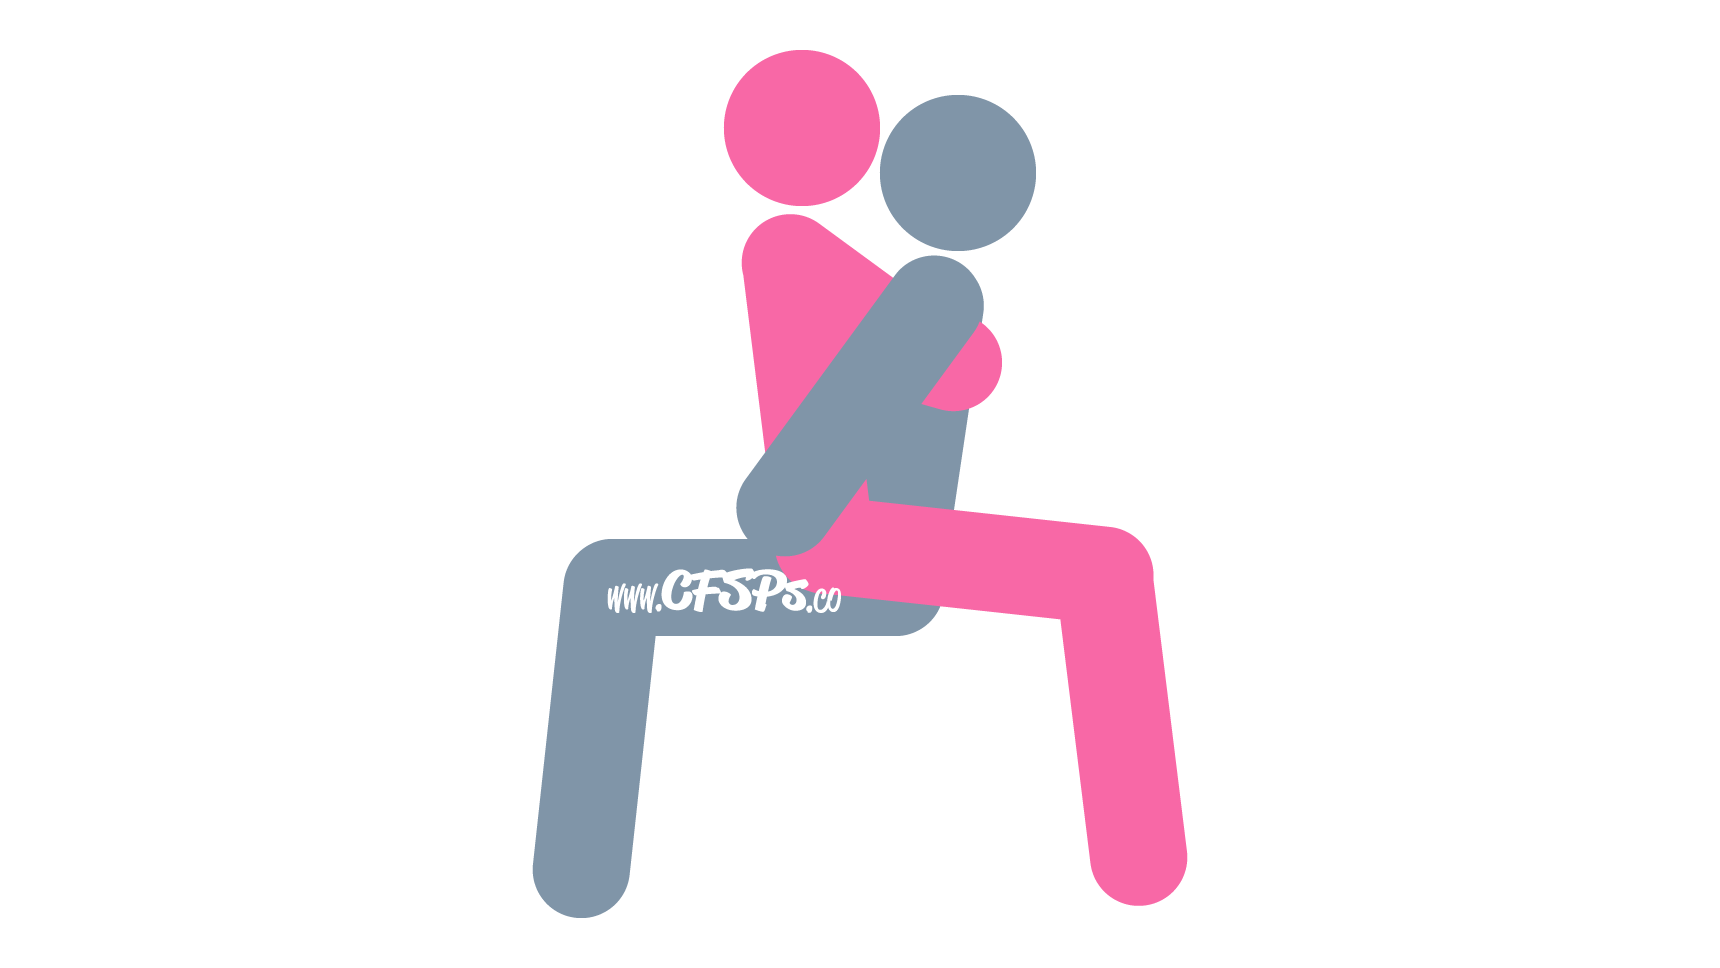 This stick figure image depicts a man and woman having sex in the Bad Santa sex position. The man is sitting on an armless chair. The woman is straddling his pelvis with her breasts near his face and legs behind him.